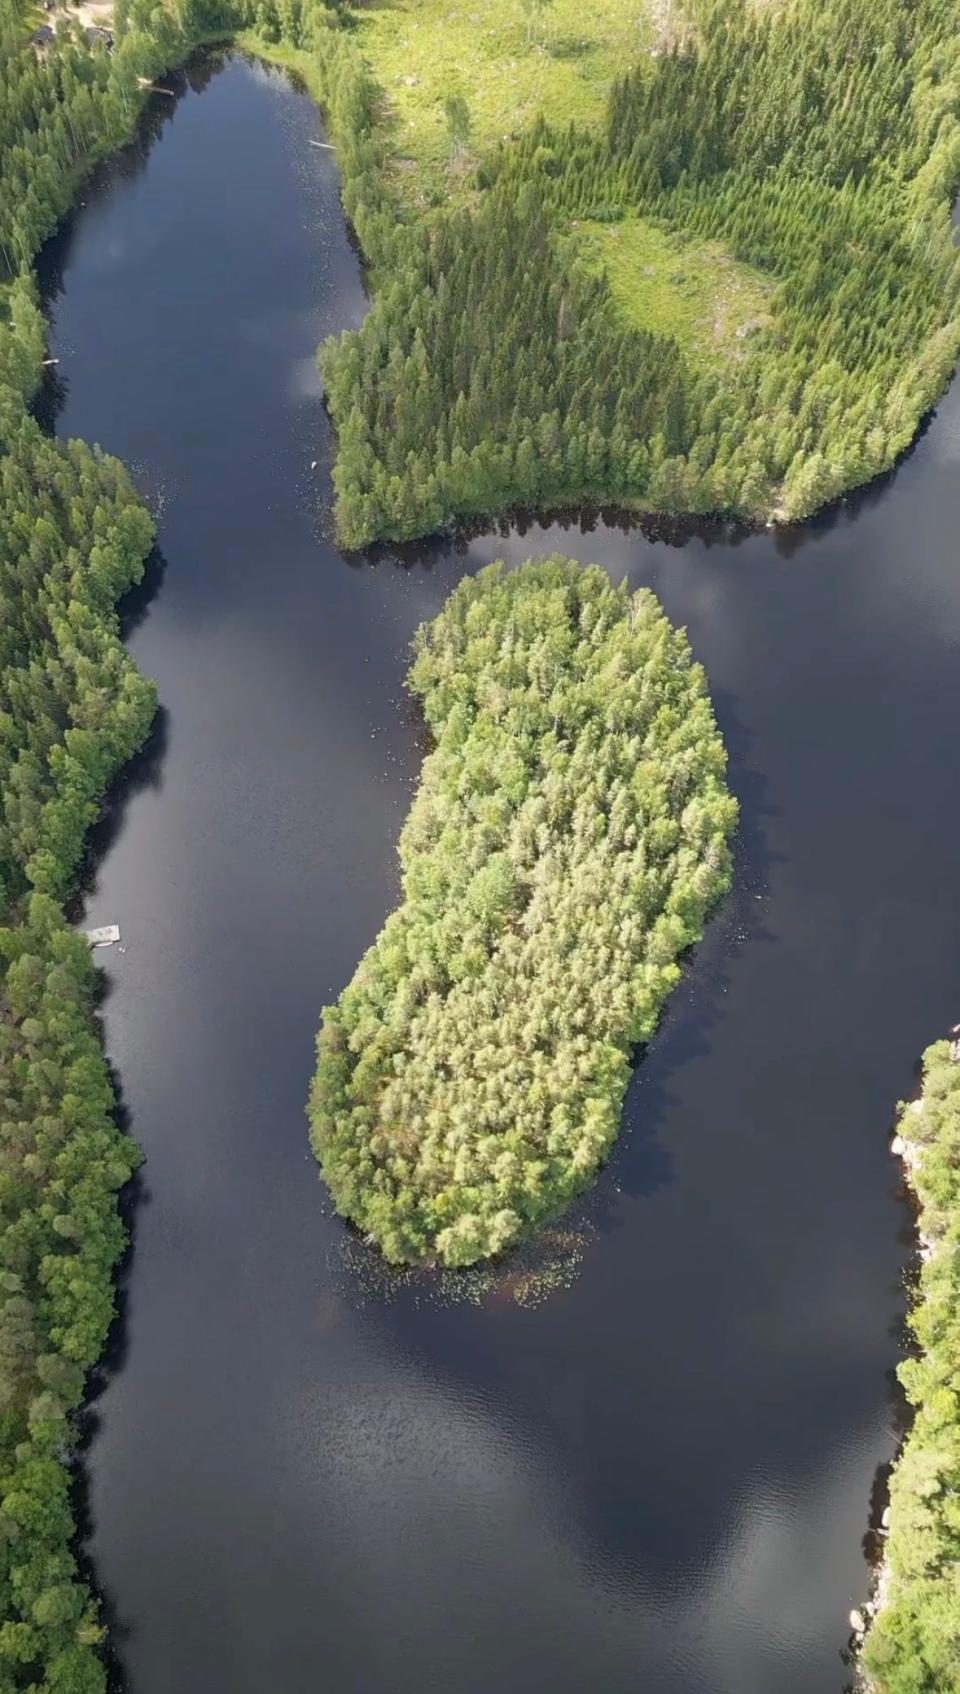 A tree-covered island on a lake in Finland.